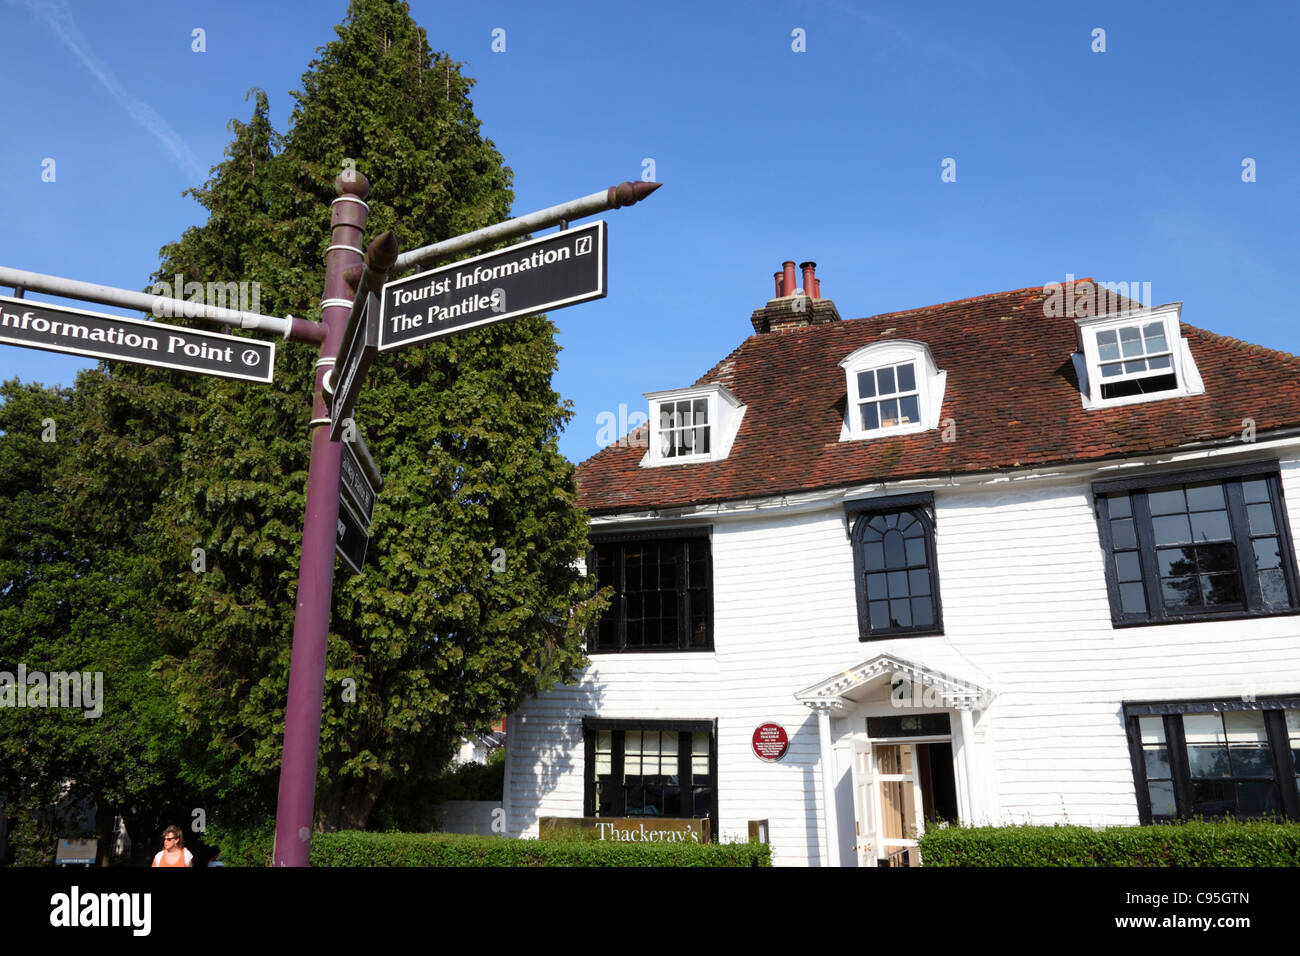 Sign to The Pantiles and Thackeray's restaurant, a typical Kentish style building with white painted weatherboards, Tunbridge Wells, Kent, England Stock Photo